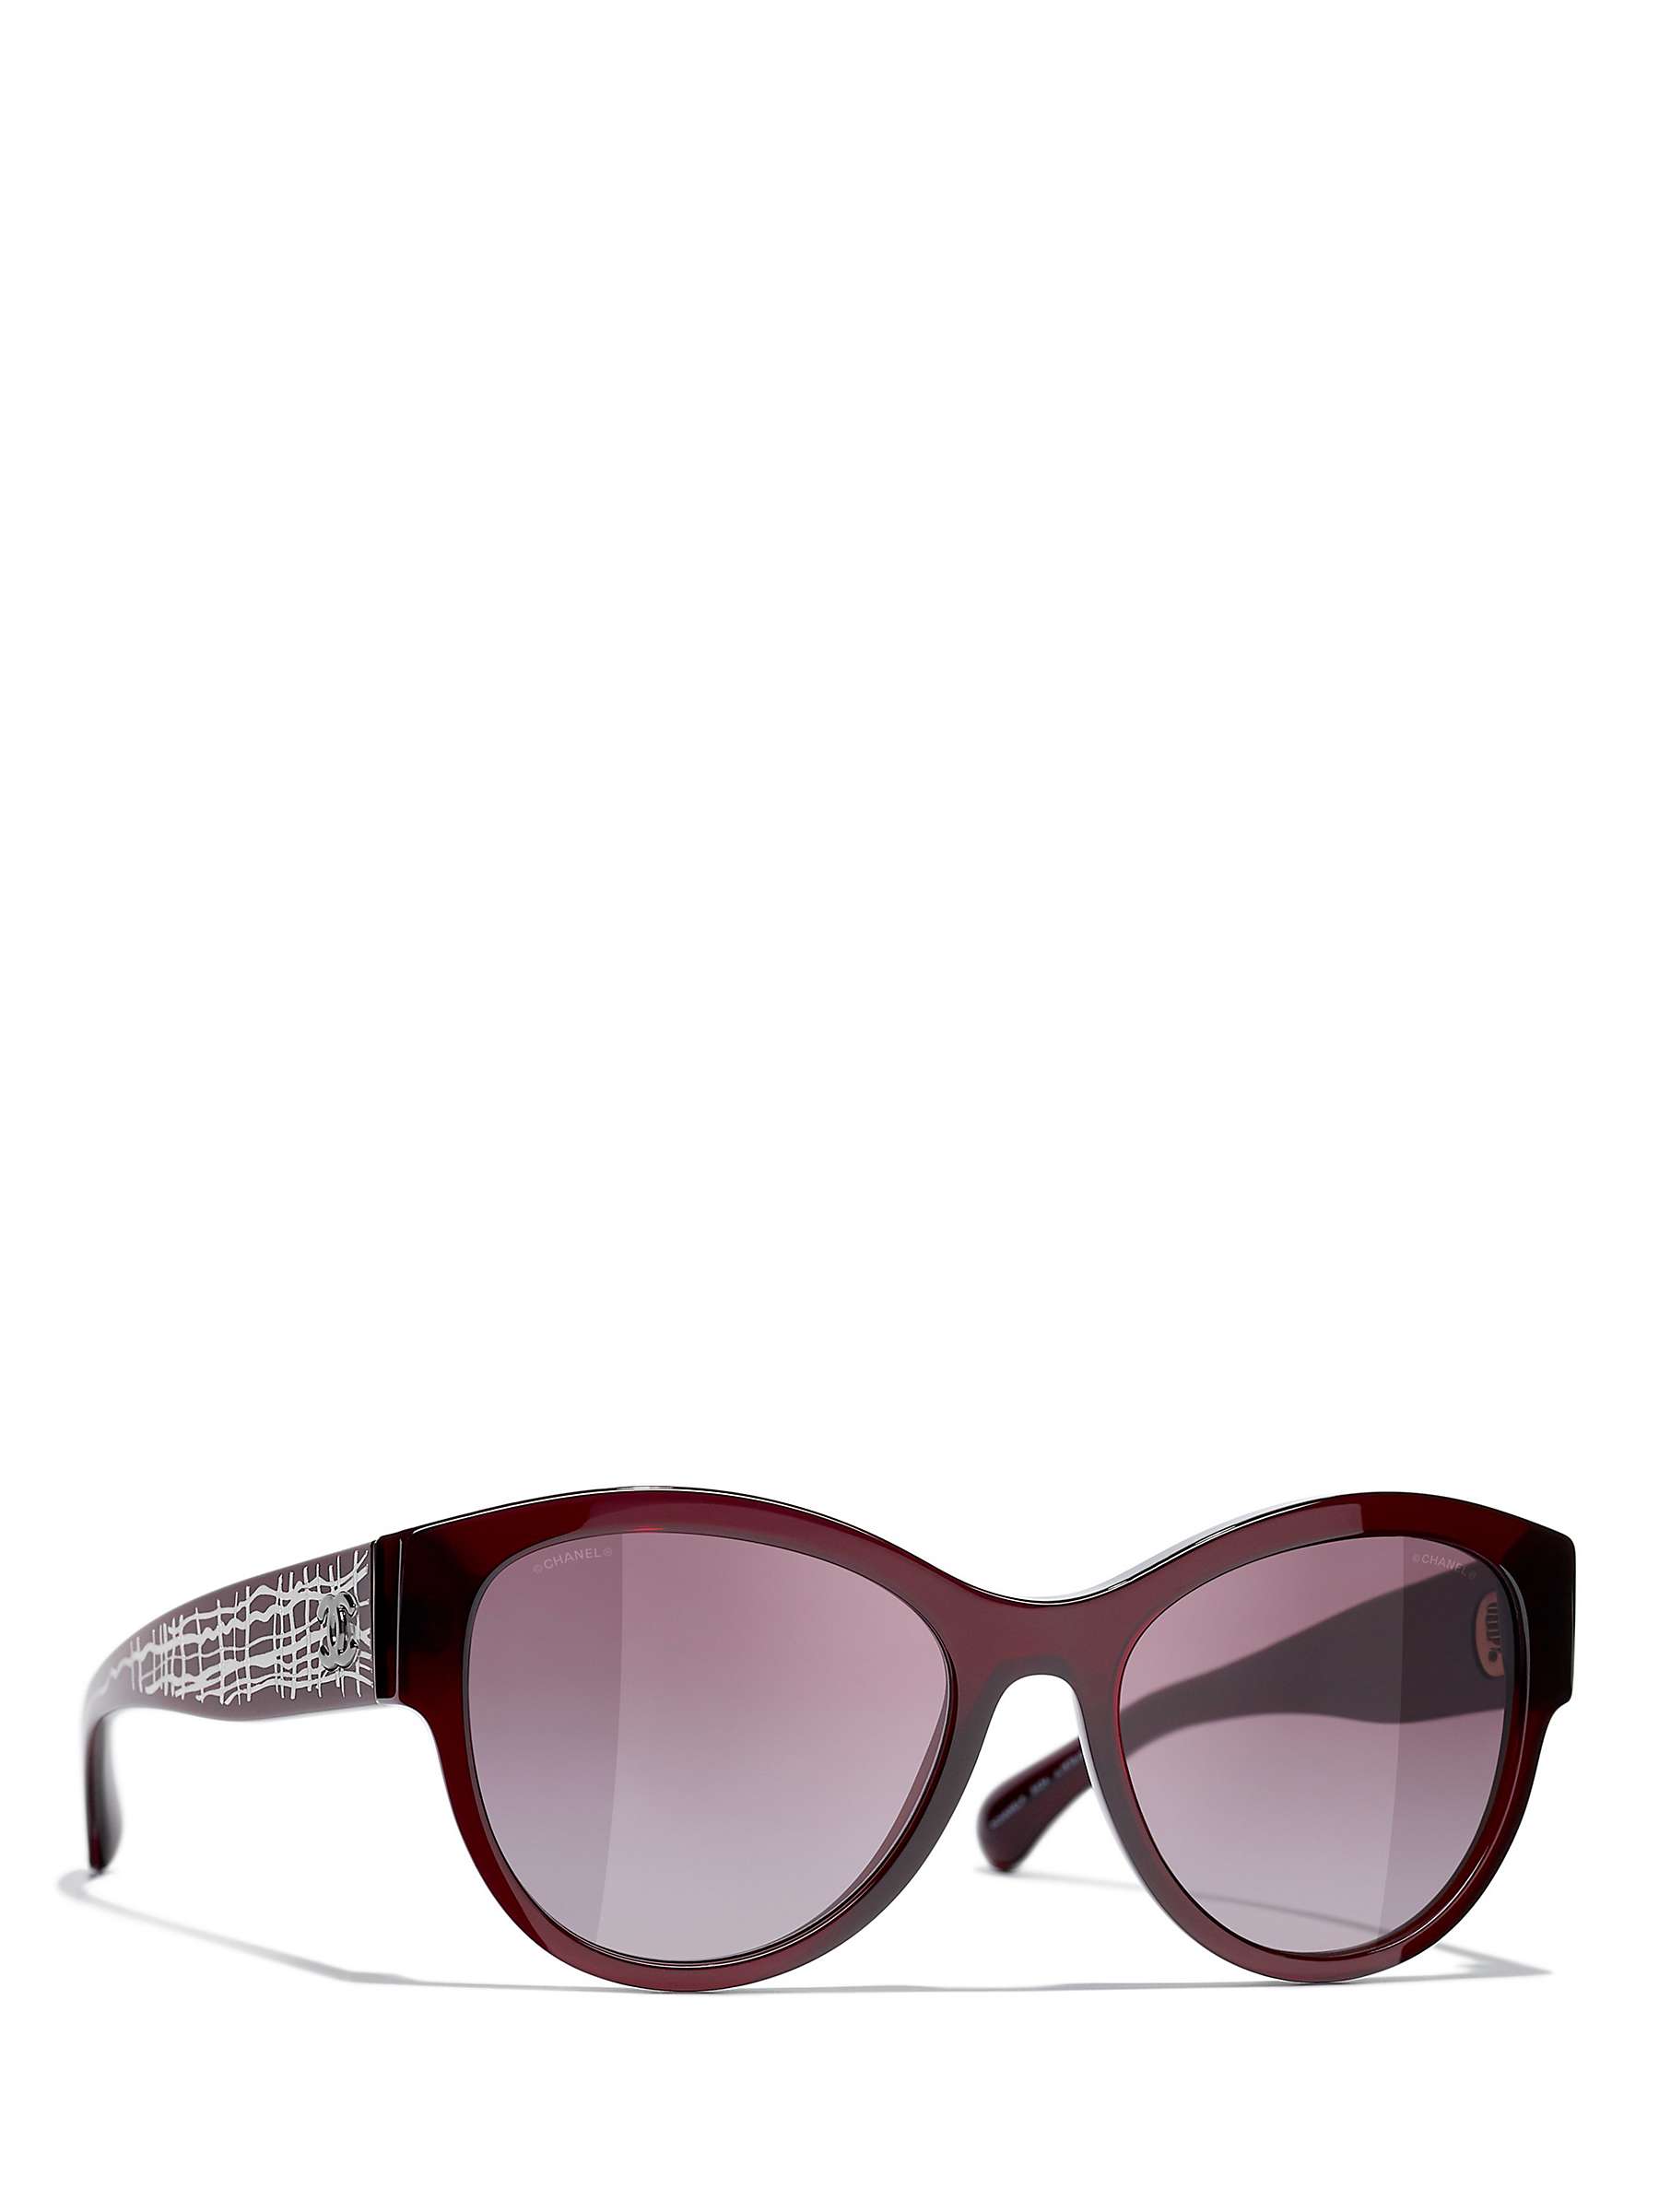 CHANEL Oval Sunglasses CH5434 Dark Red/Pink Gradient at John Lewis &  Partners